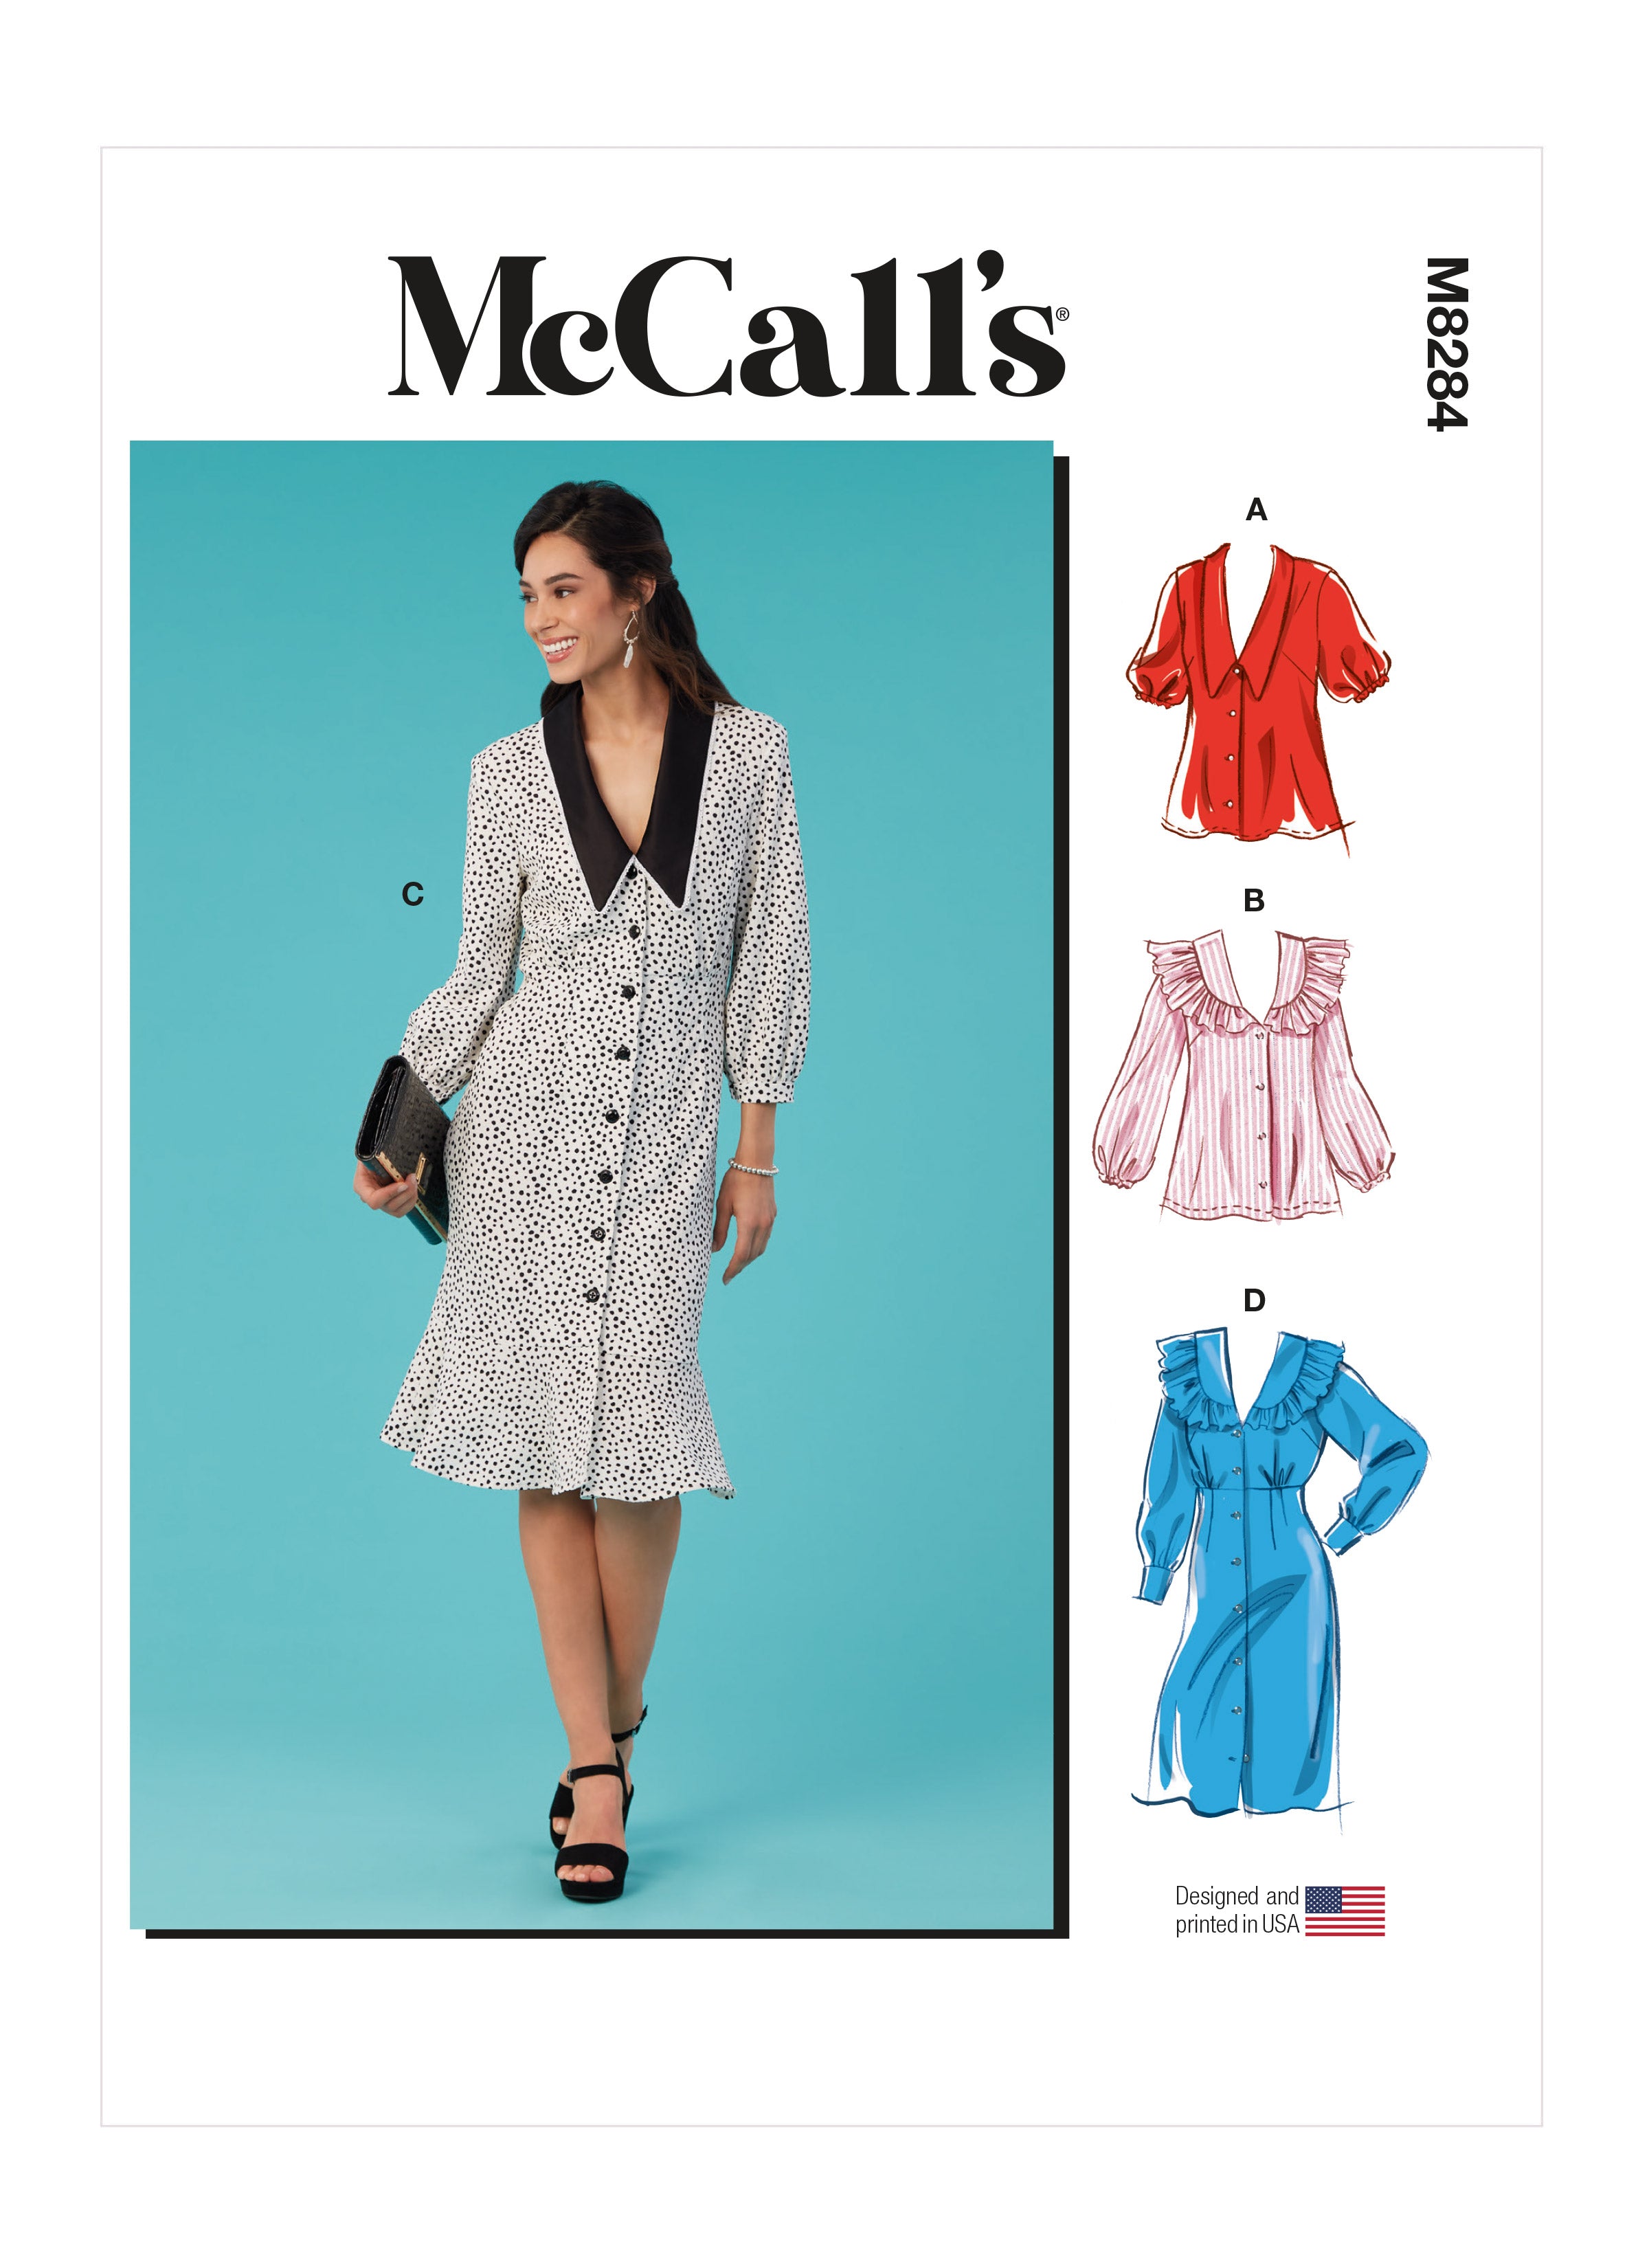 McCalls 8284 Misses' Tops and Dresses sewing pattern from Jaycotts Sewing Supplies